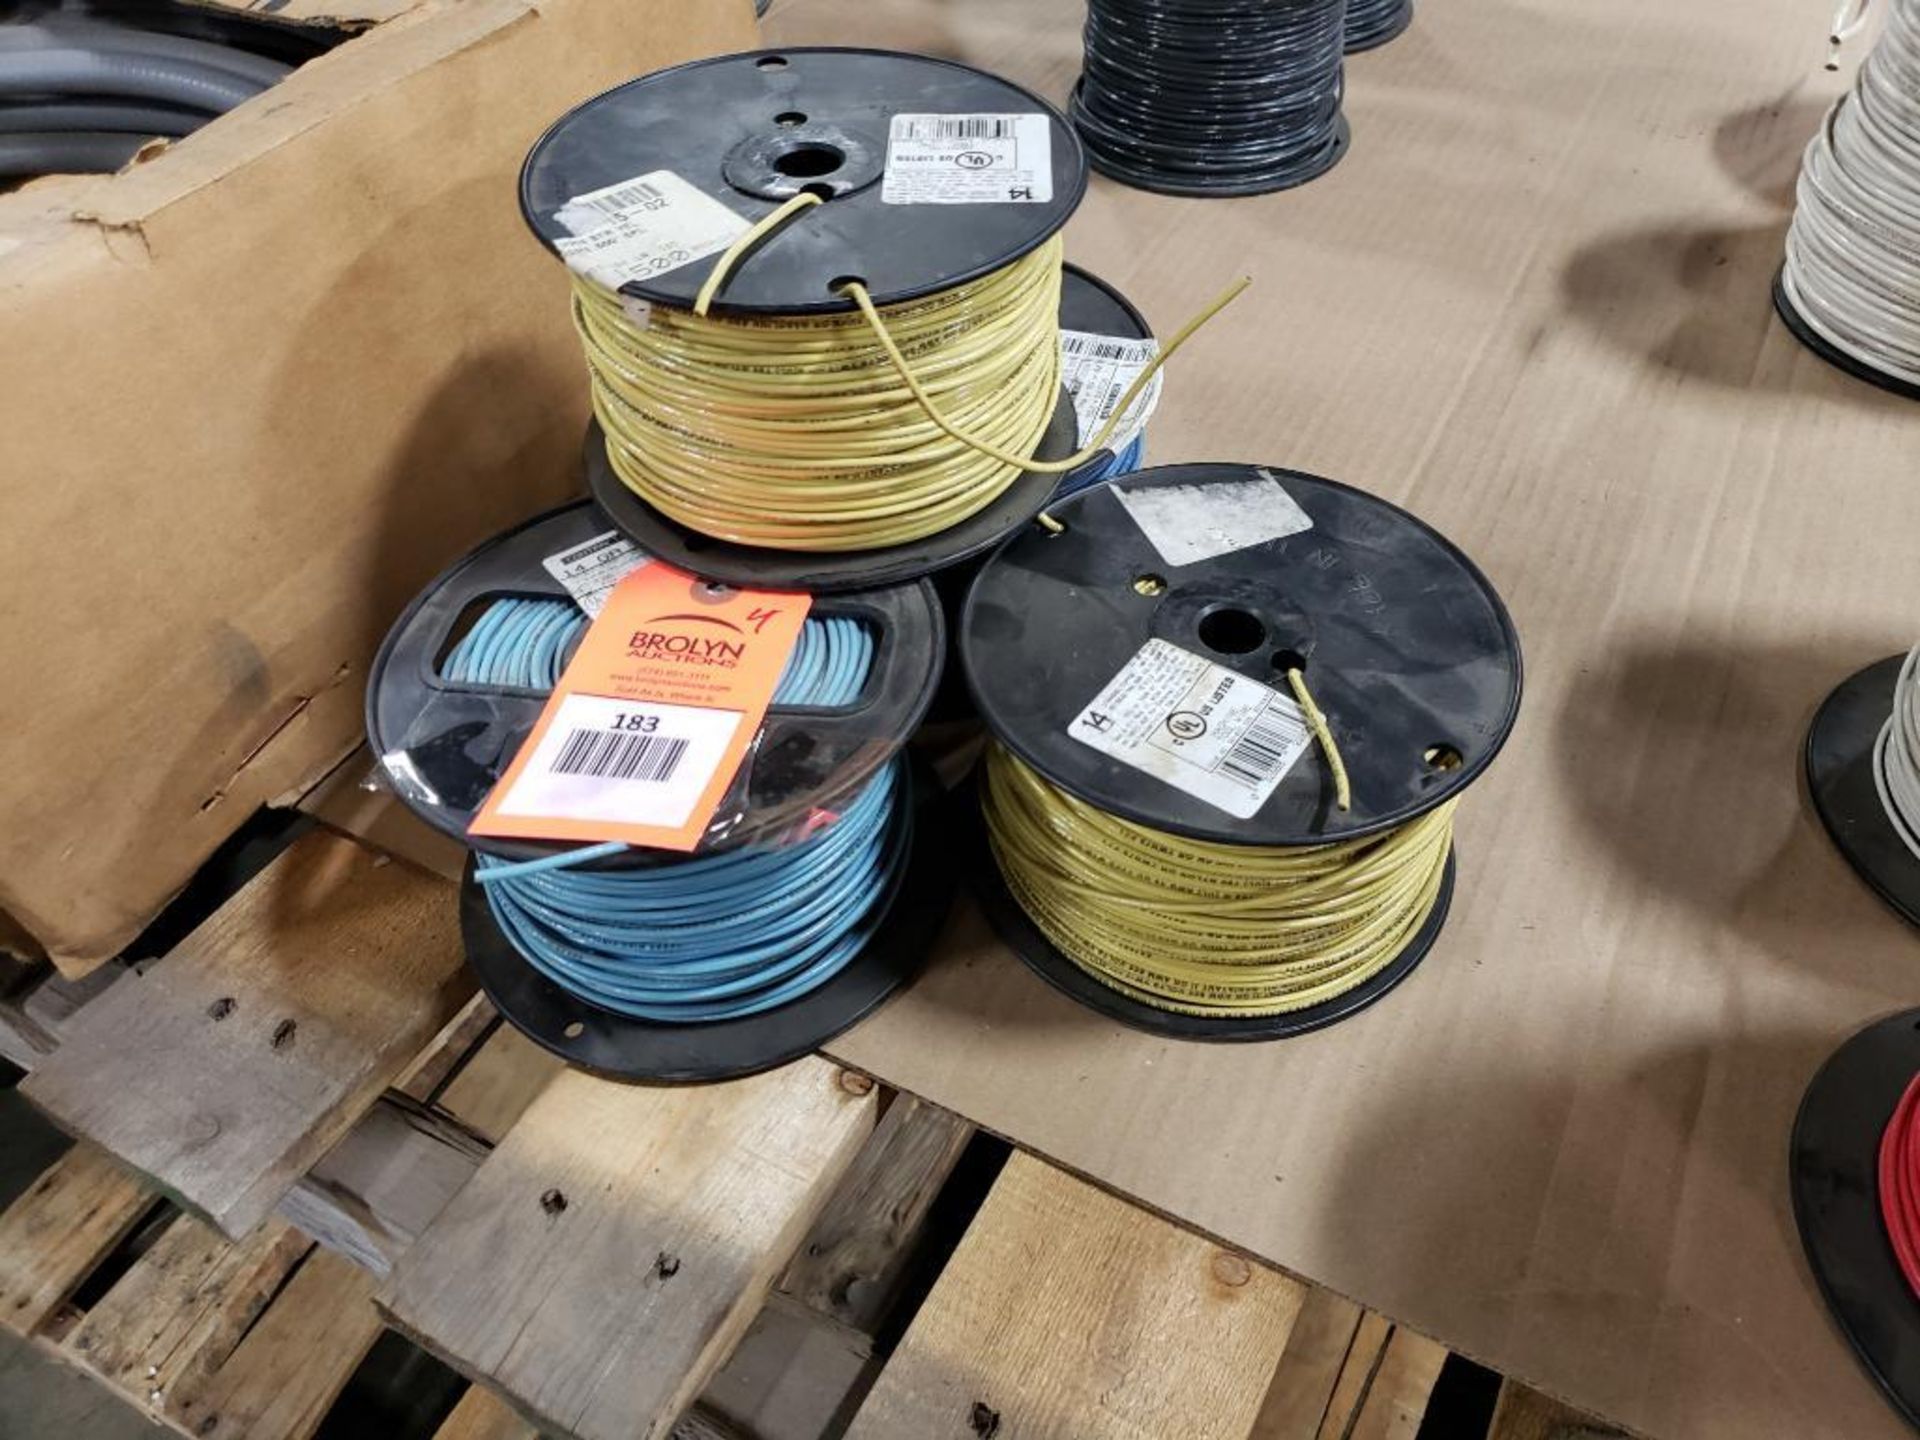 Qty 4 - Spool of contractor wire. 14-Yellow, 14-Blue.